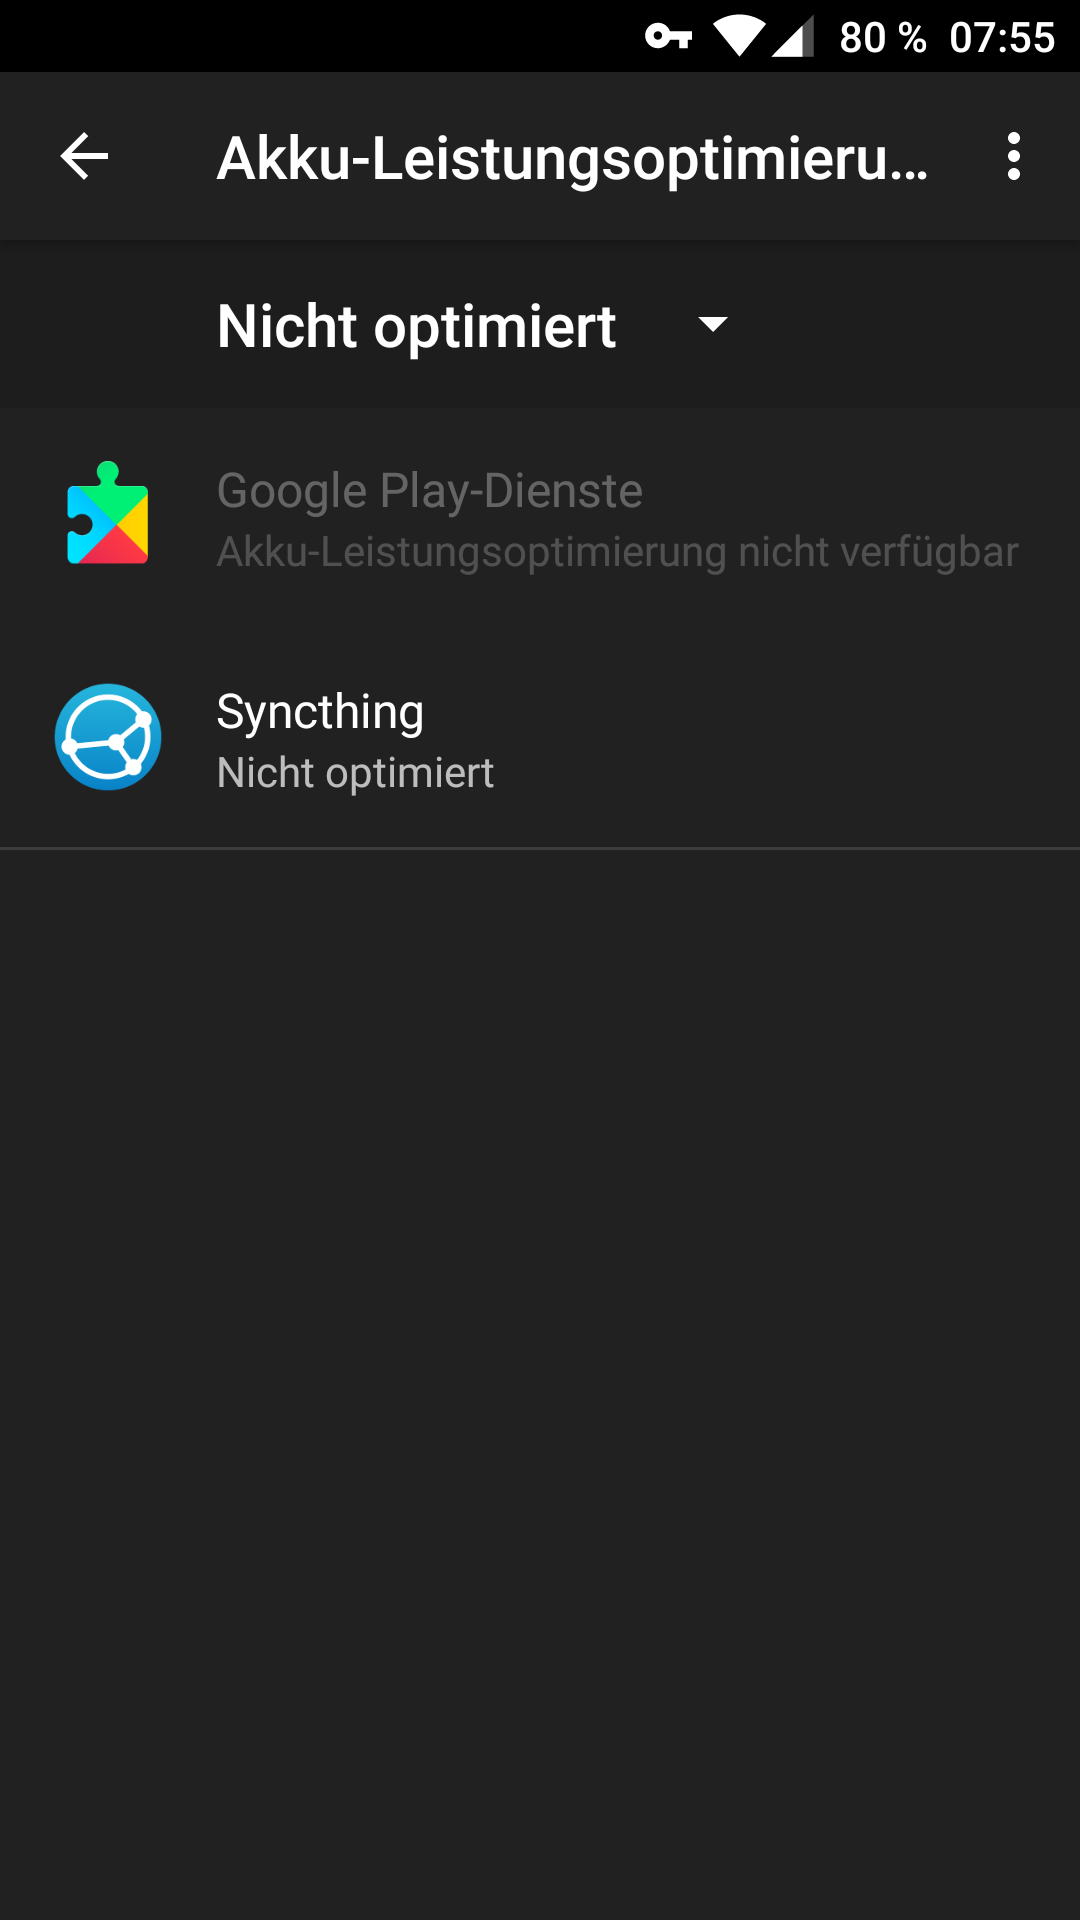 No background synchronization since Android 6.0.1 ...